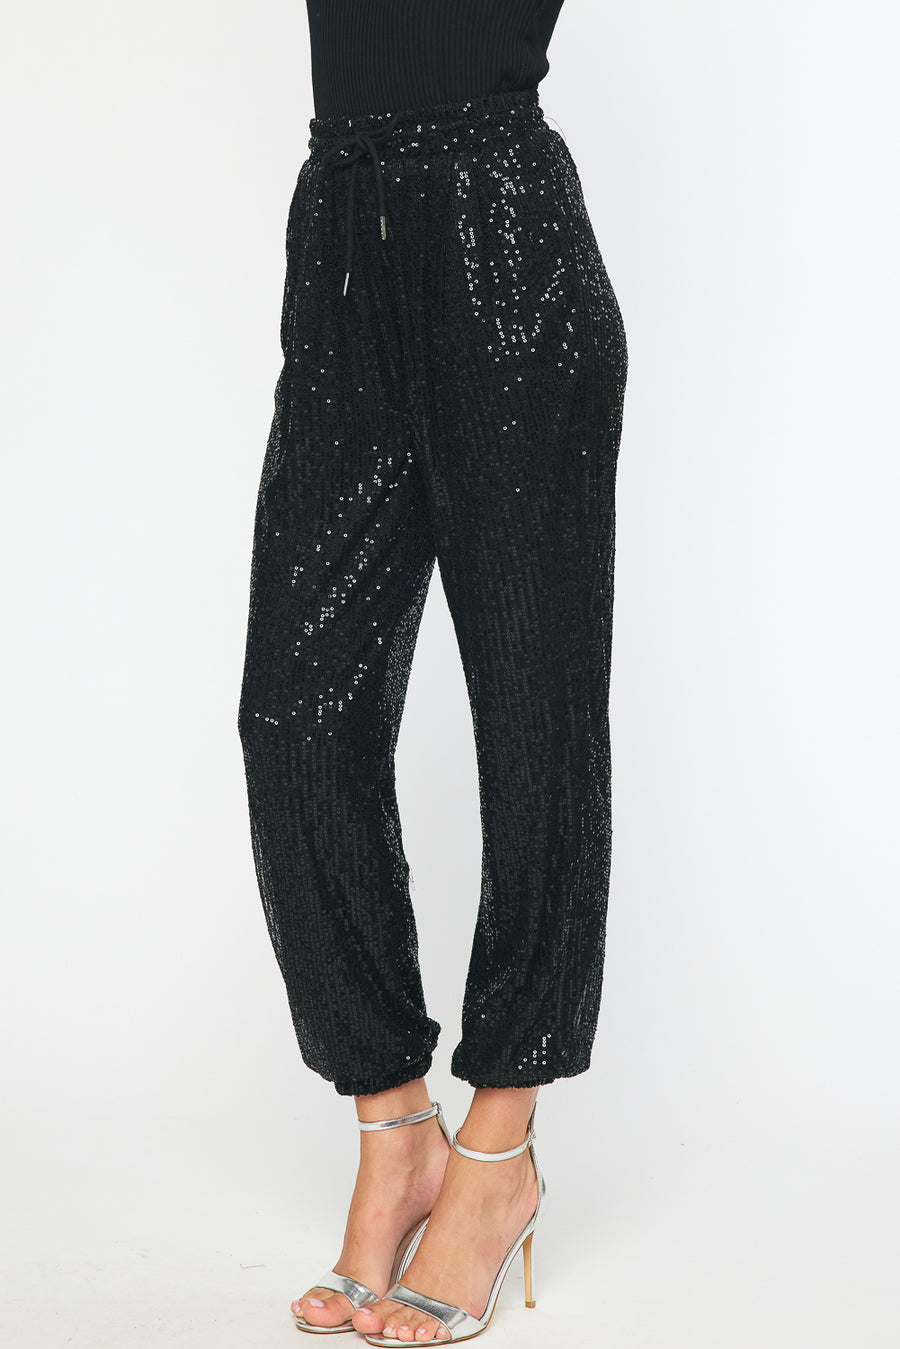 Black Sequin Joggers – Cricket Alley Ministries